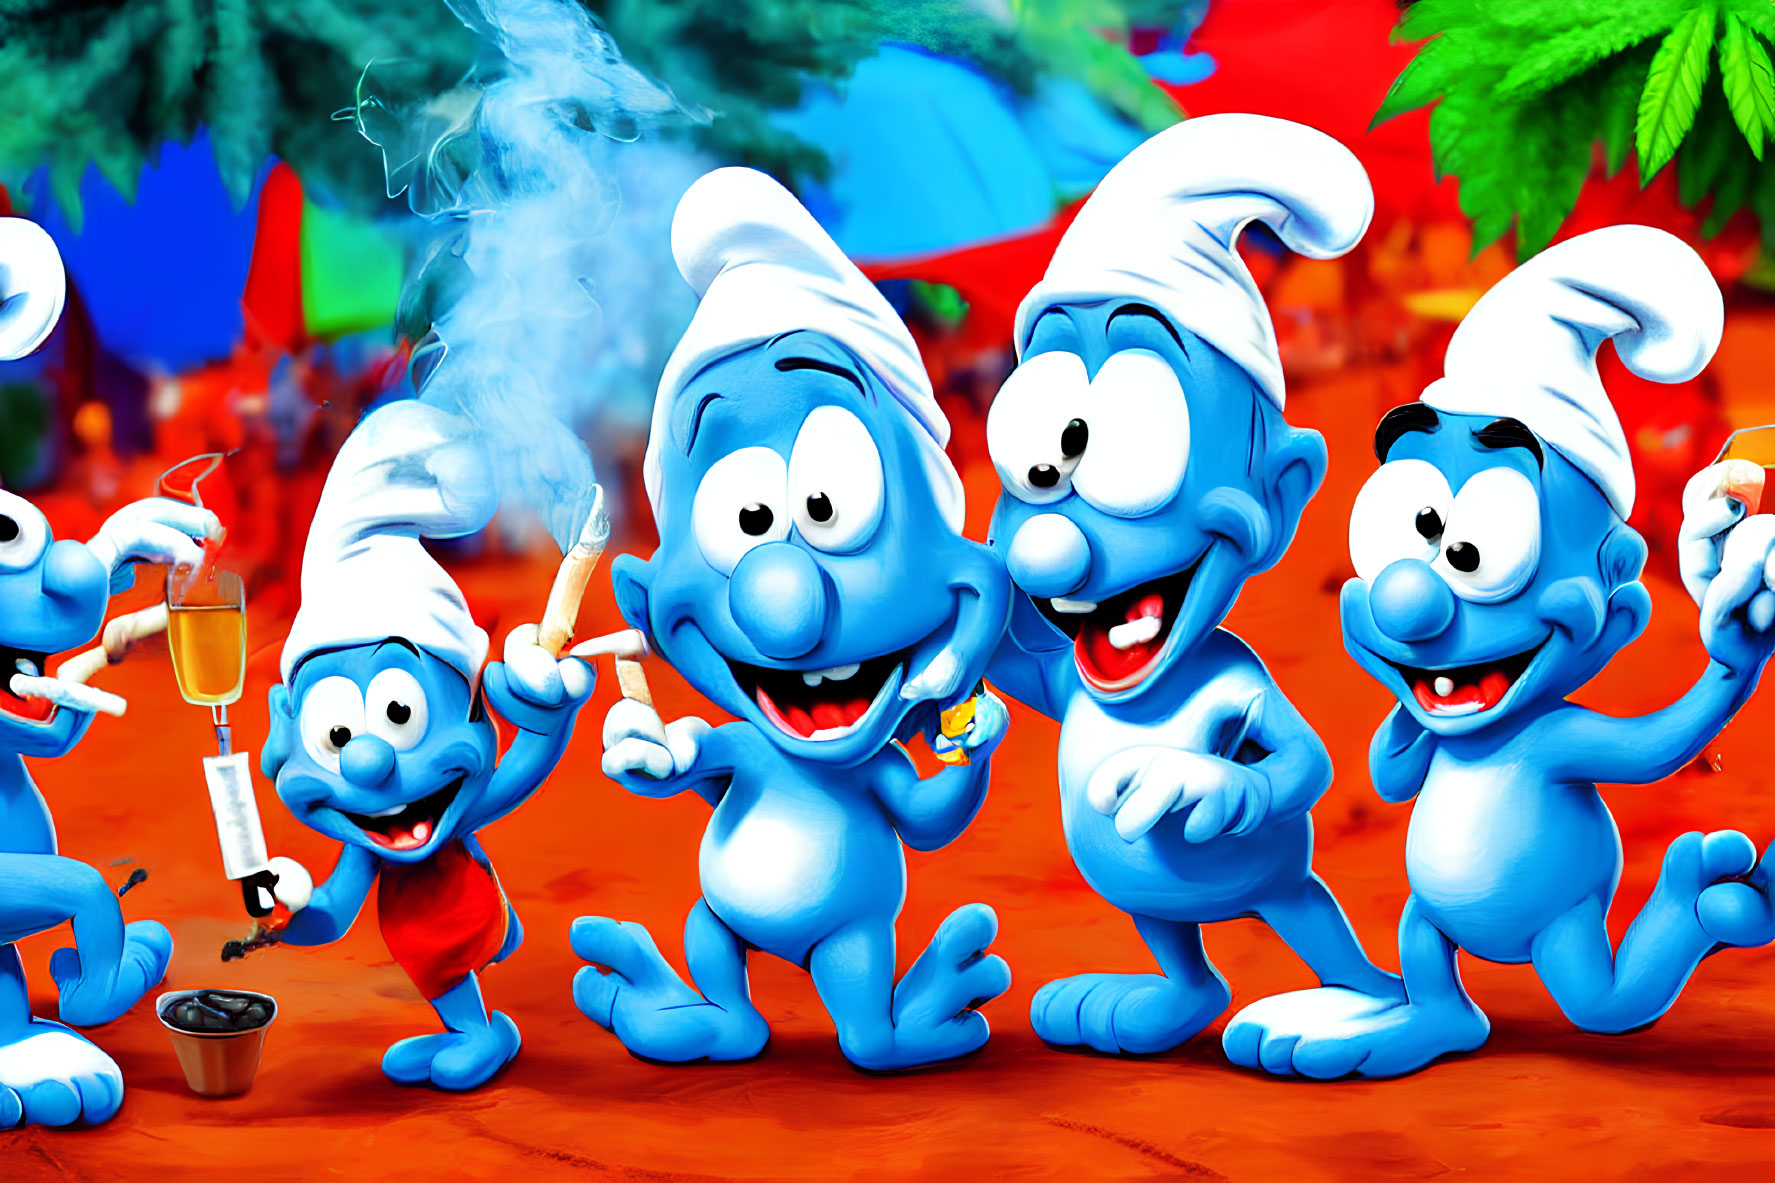 Blue animated characters in white hats gather happily with paintbrush and red cup, smiling.